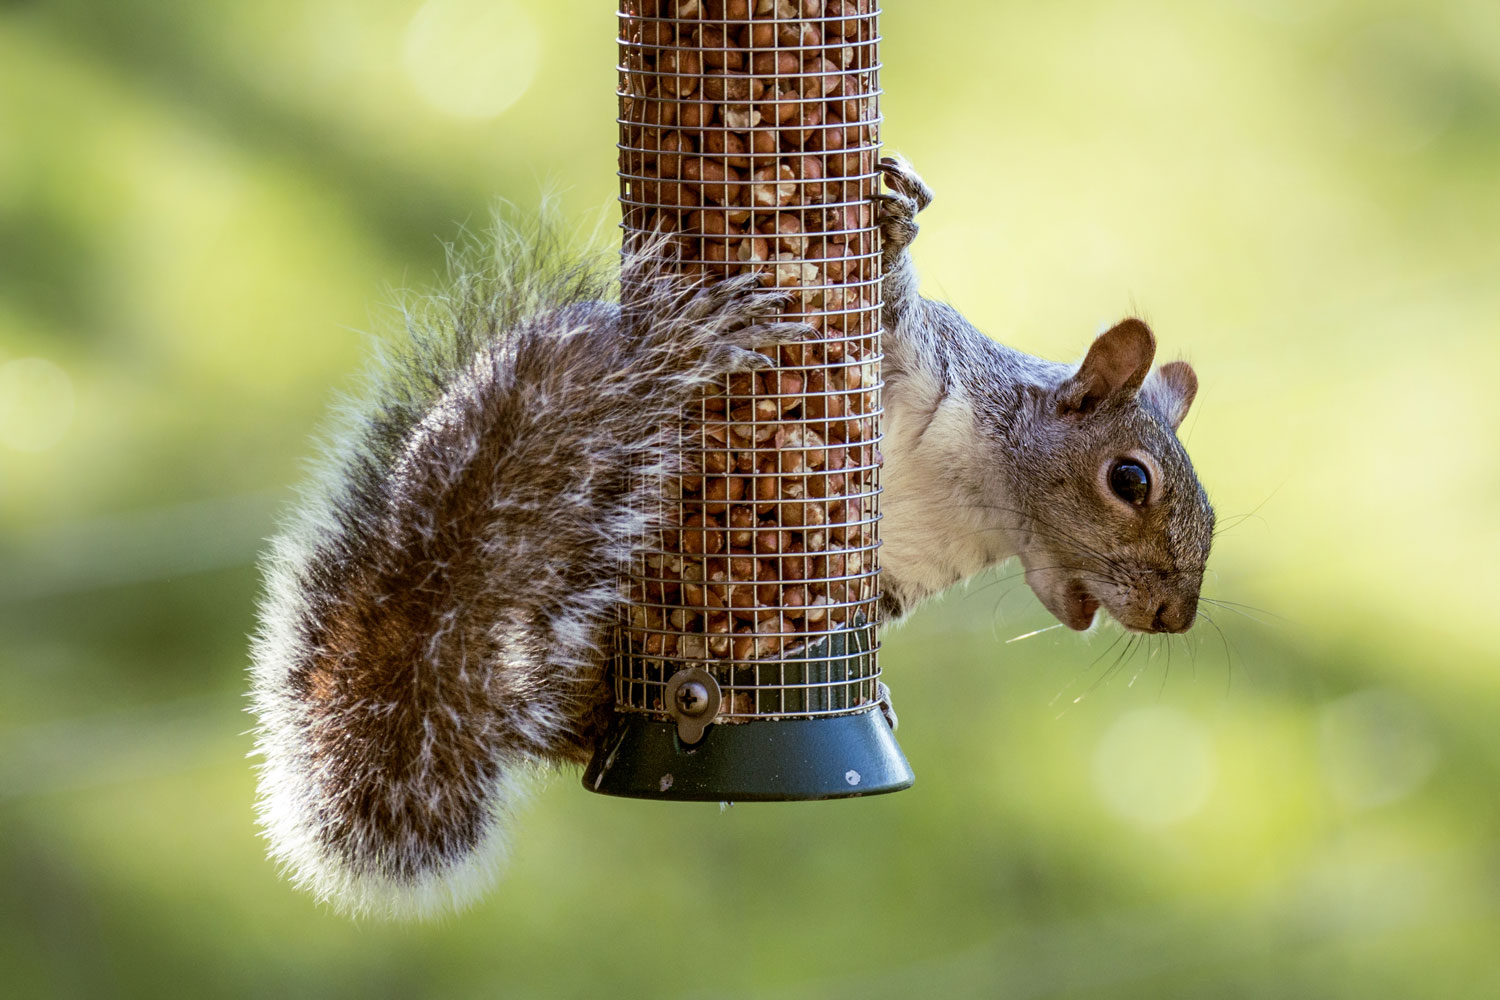 A squirrel hanging from a feeder